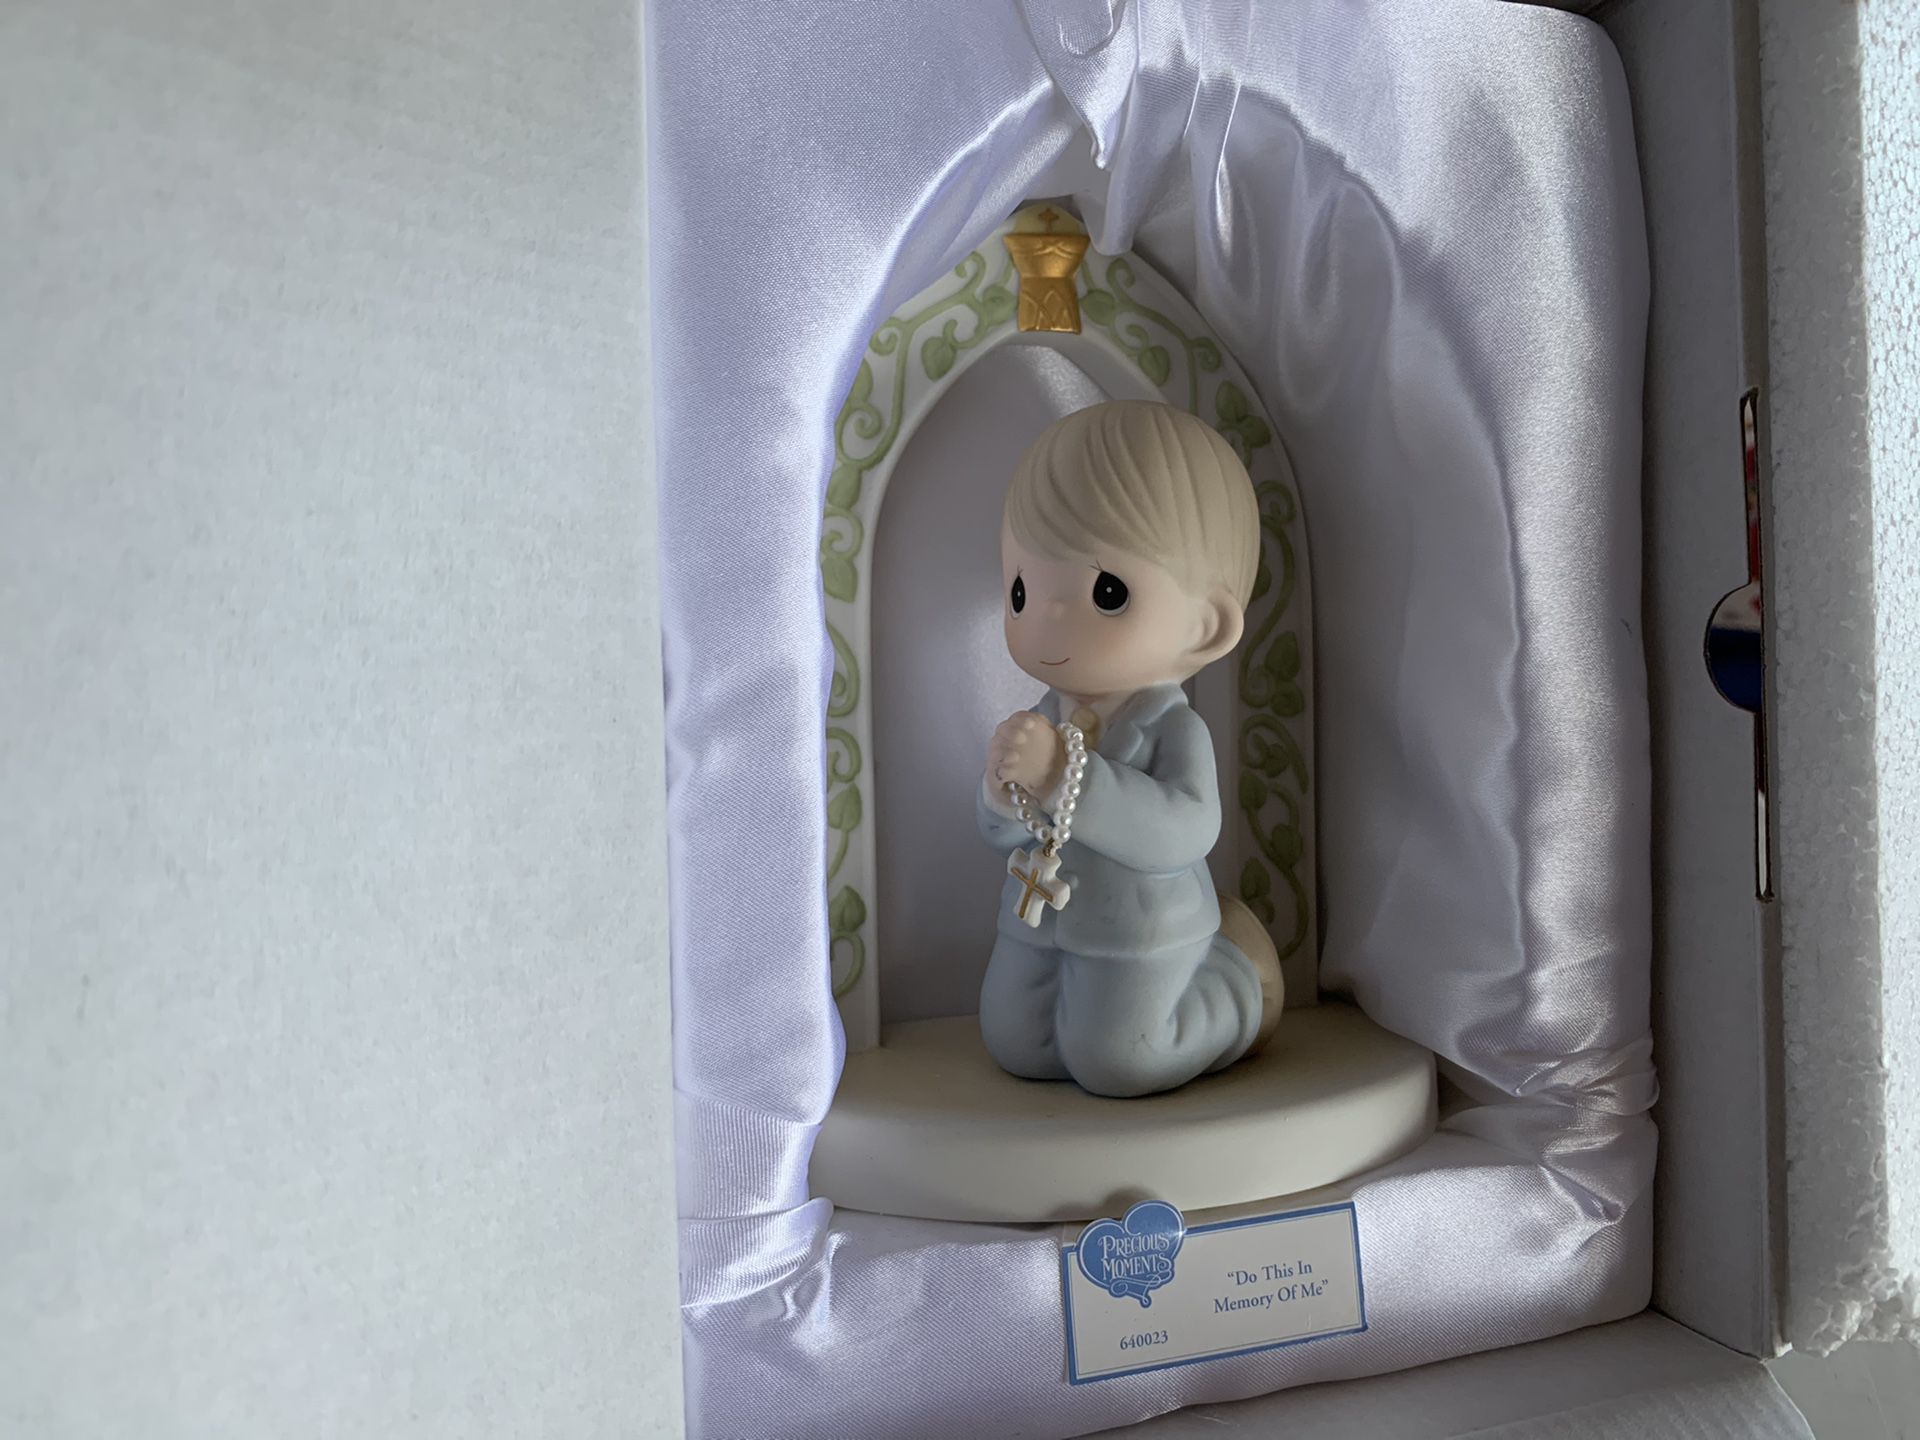 Precious Moments Communion Figurine “Do this in memory of me”